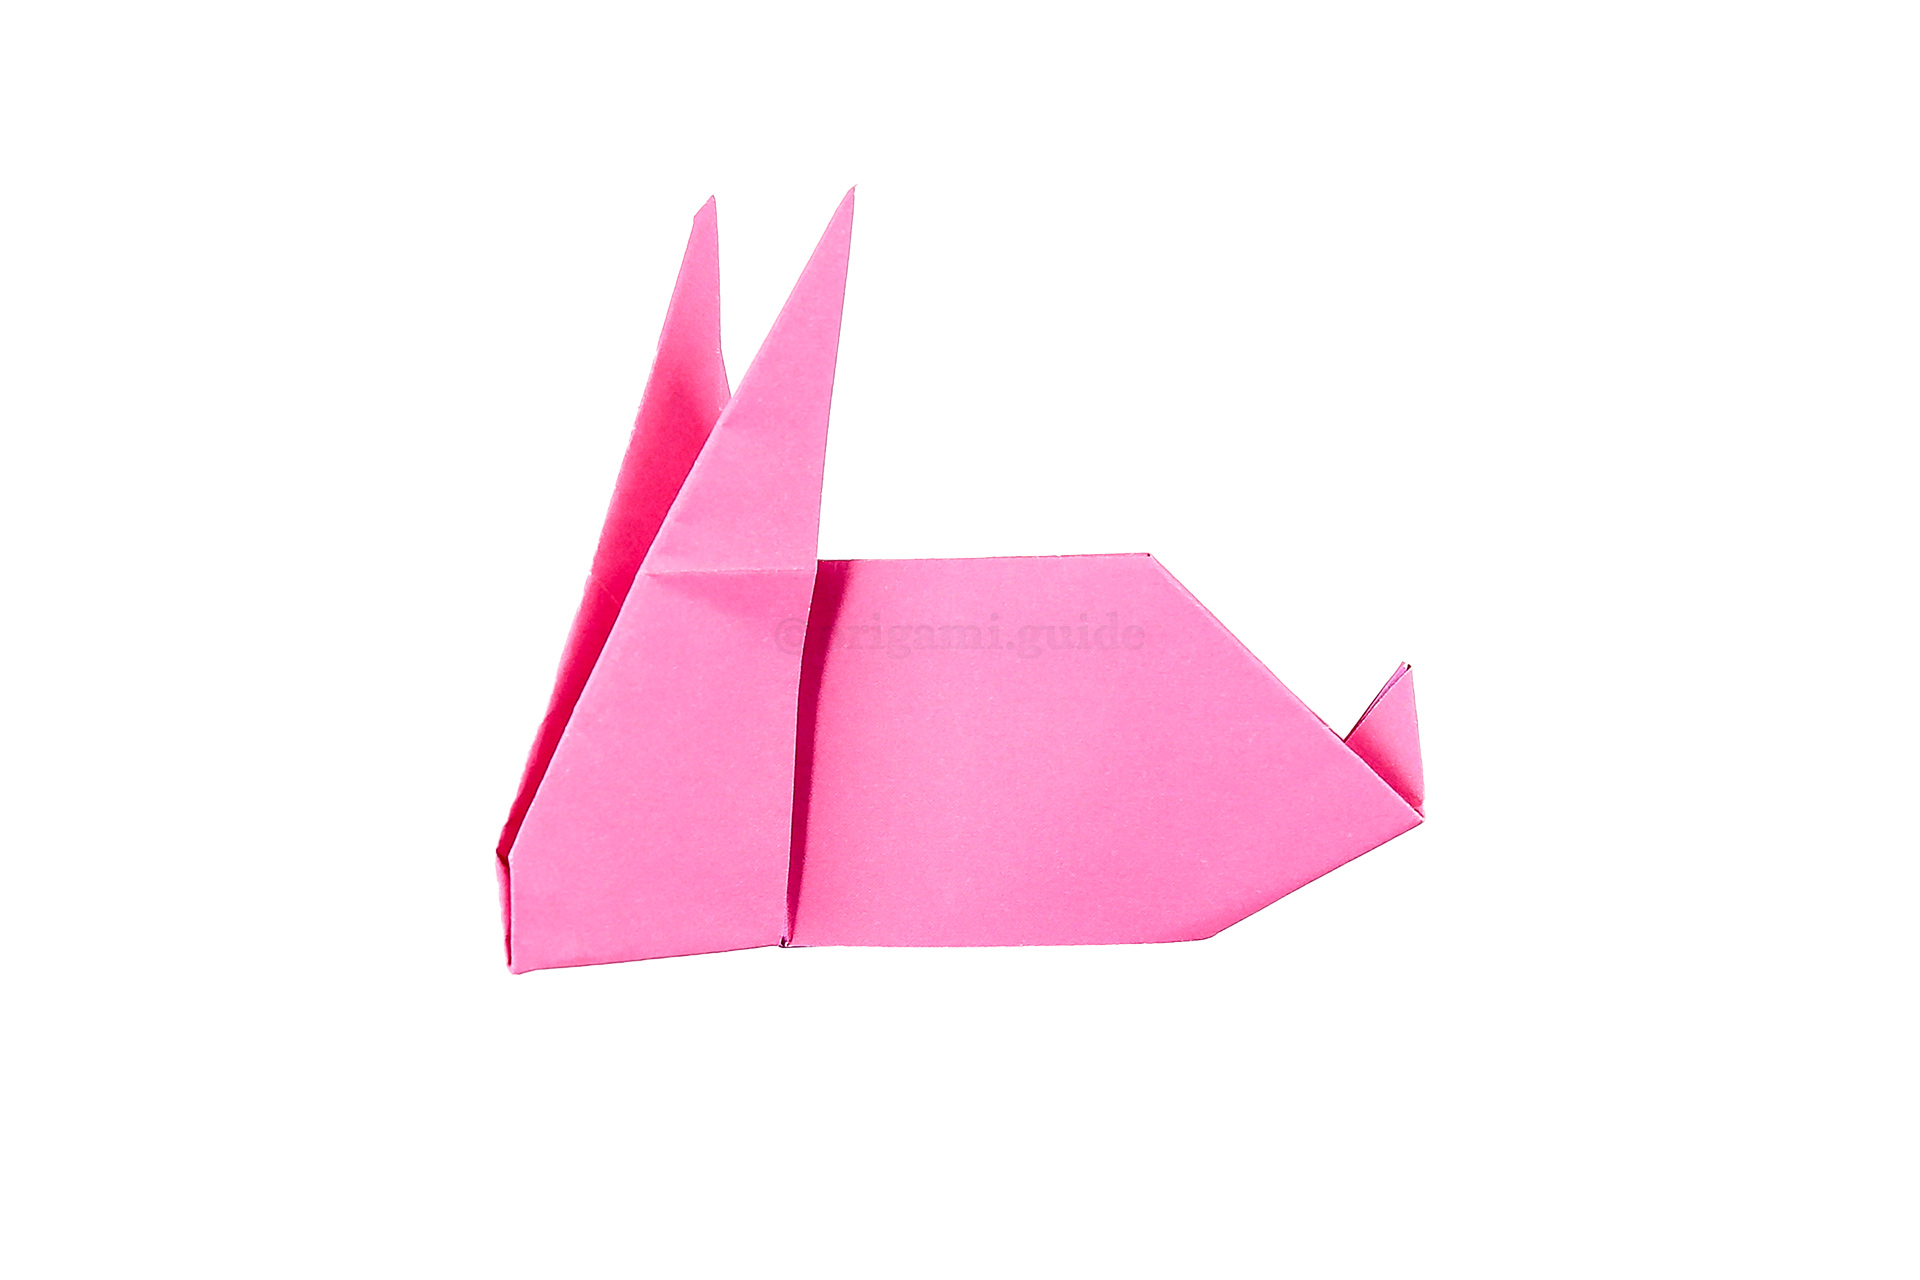 You can also fold the rabbit's nose inside to make it rounded.